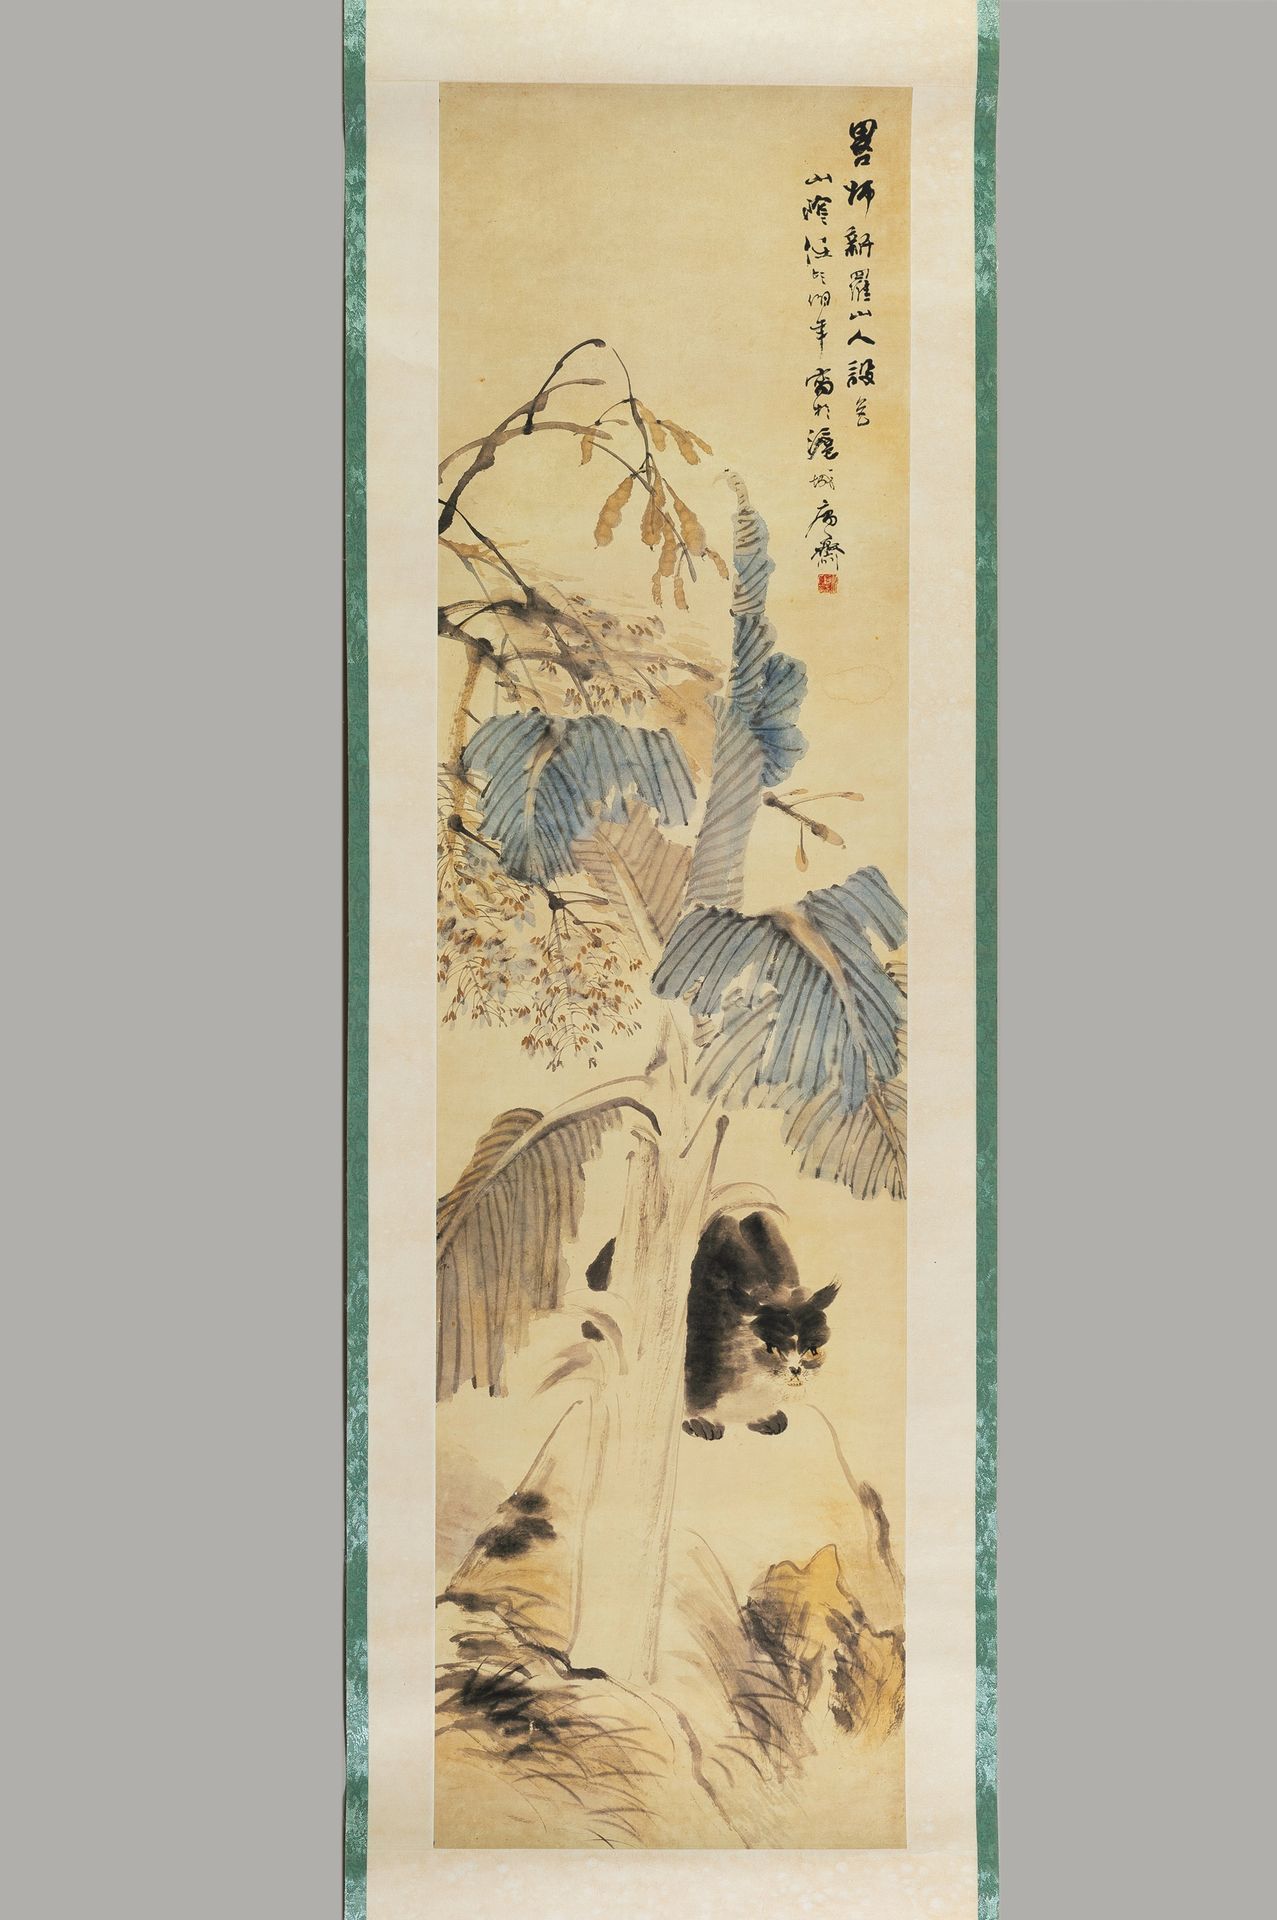 A FINE SCROLL PAINTING OF A CAT BEHIND A TREE UNE PEINTURE FINE D'UN CHAT ACCROC&hellip;